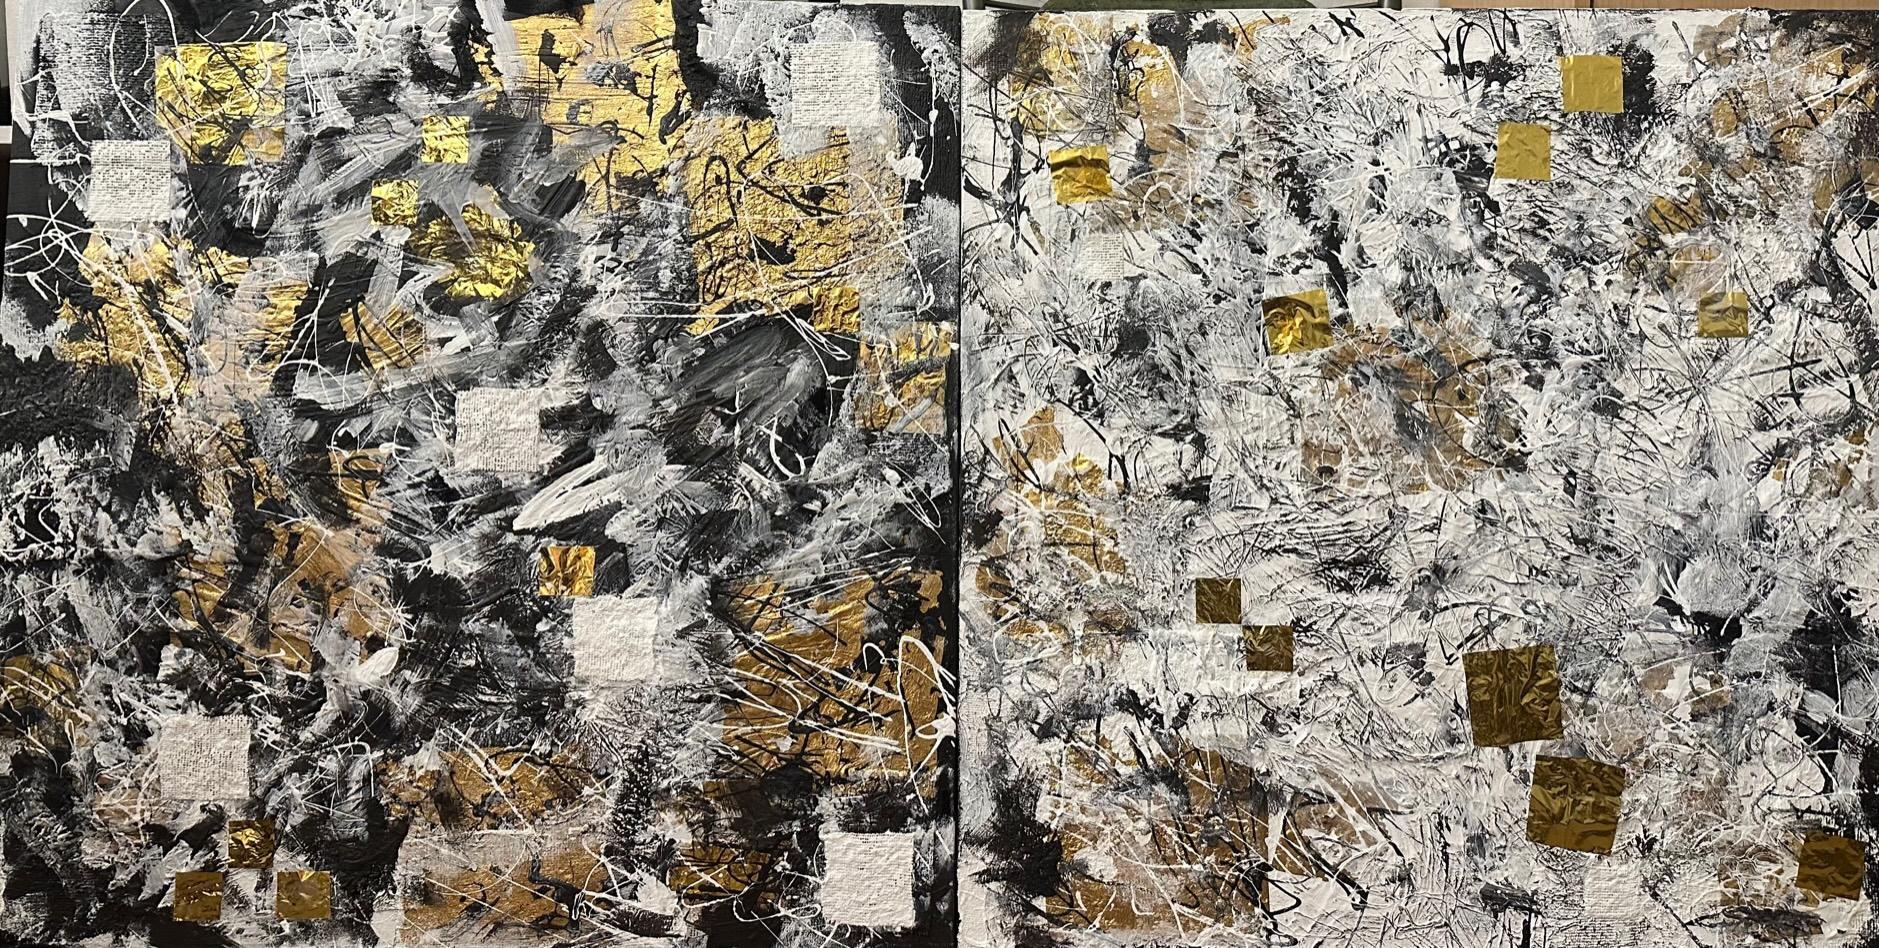 Golden Diptych - Abstract Painting By Beverly Bigwood

About the artist, Beverly Bigwood
Award-winning Artist Beverly Bigwood (Bigwood Art) received the highest compliment an artist can receive in their career; Beverly’s artwork was stolen from a